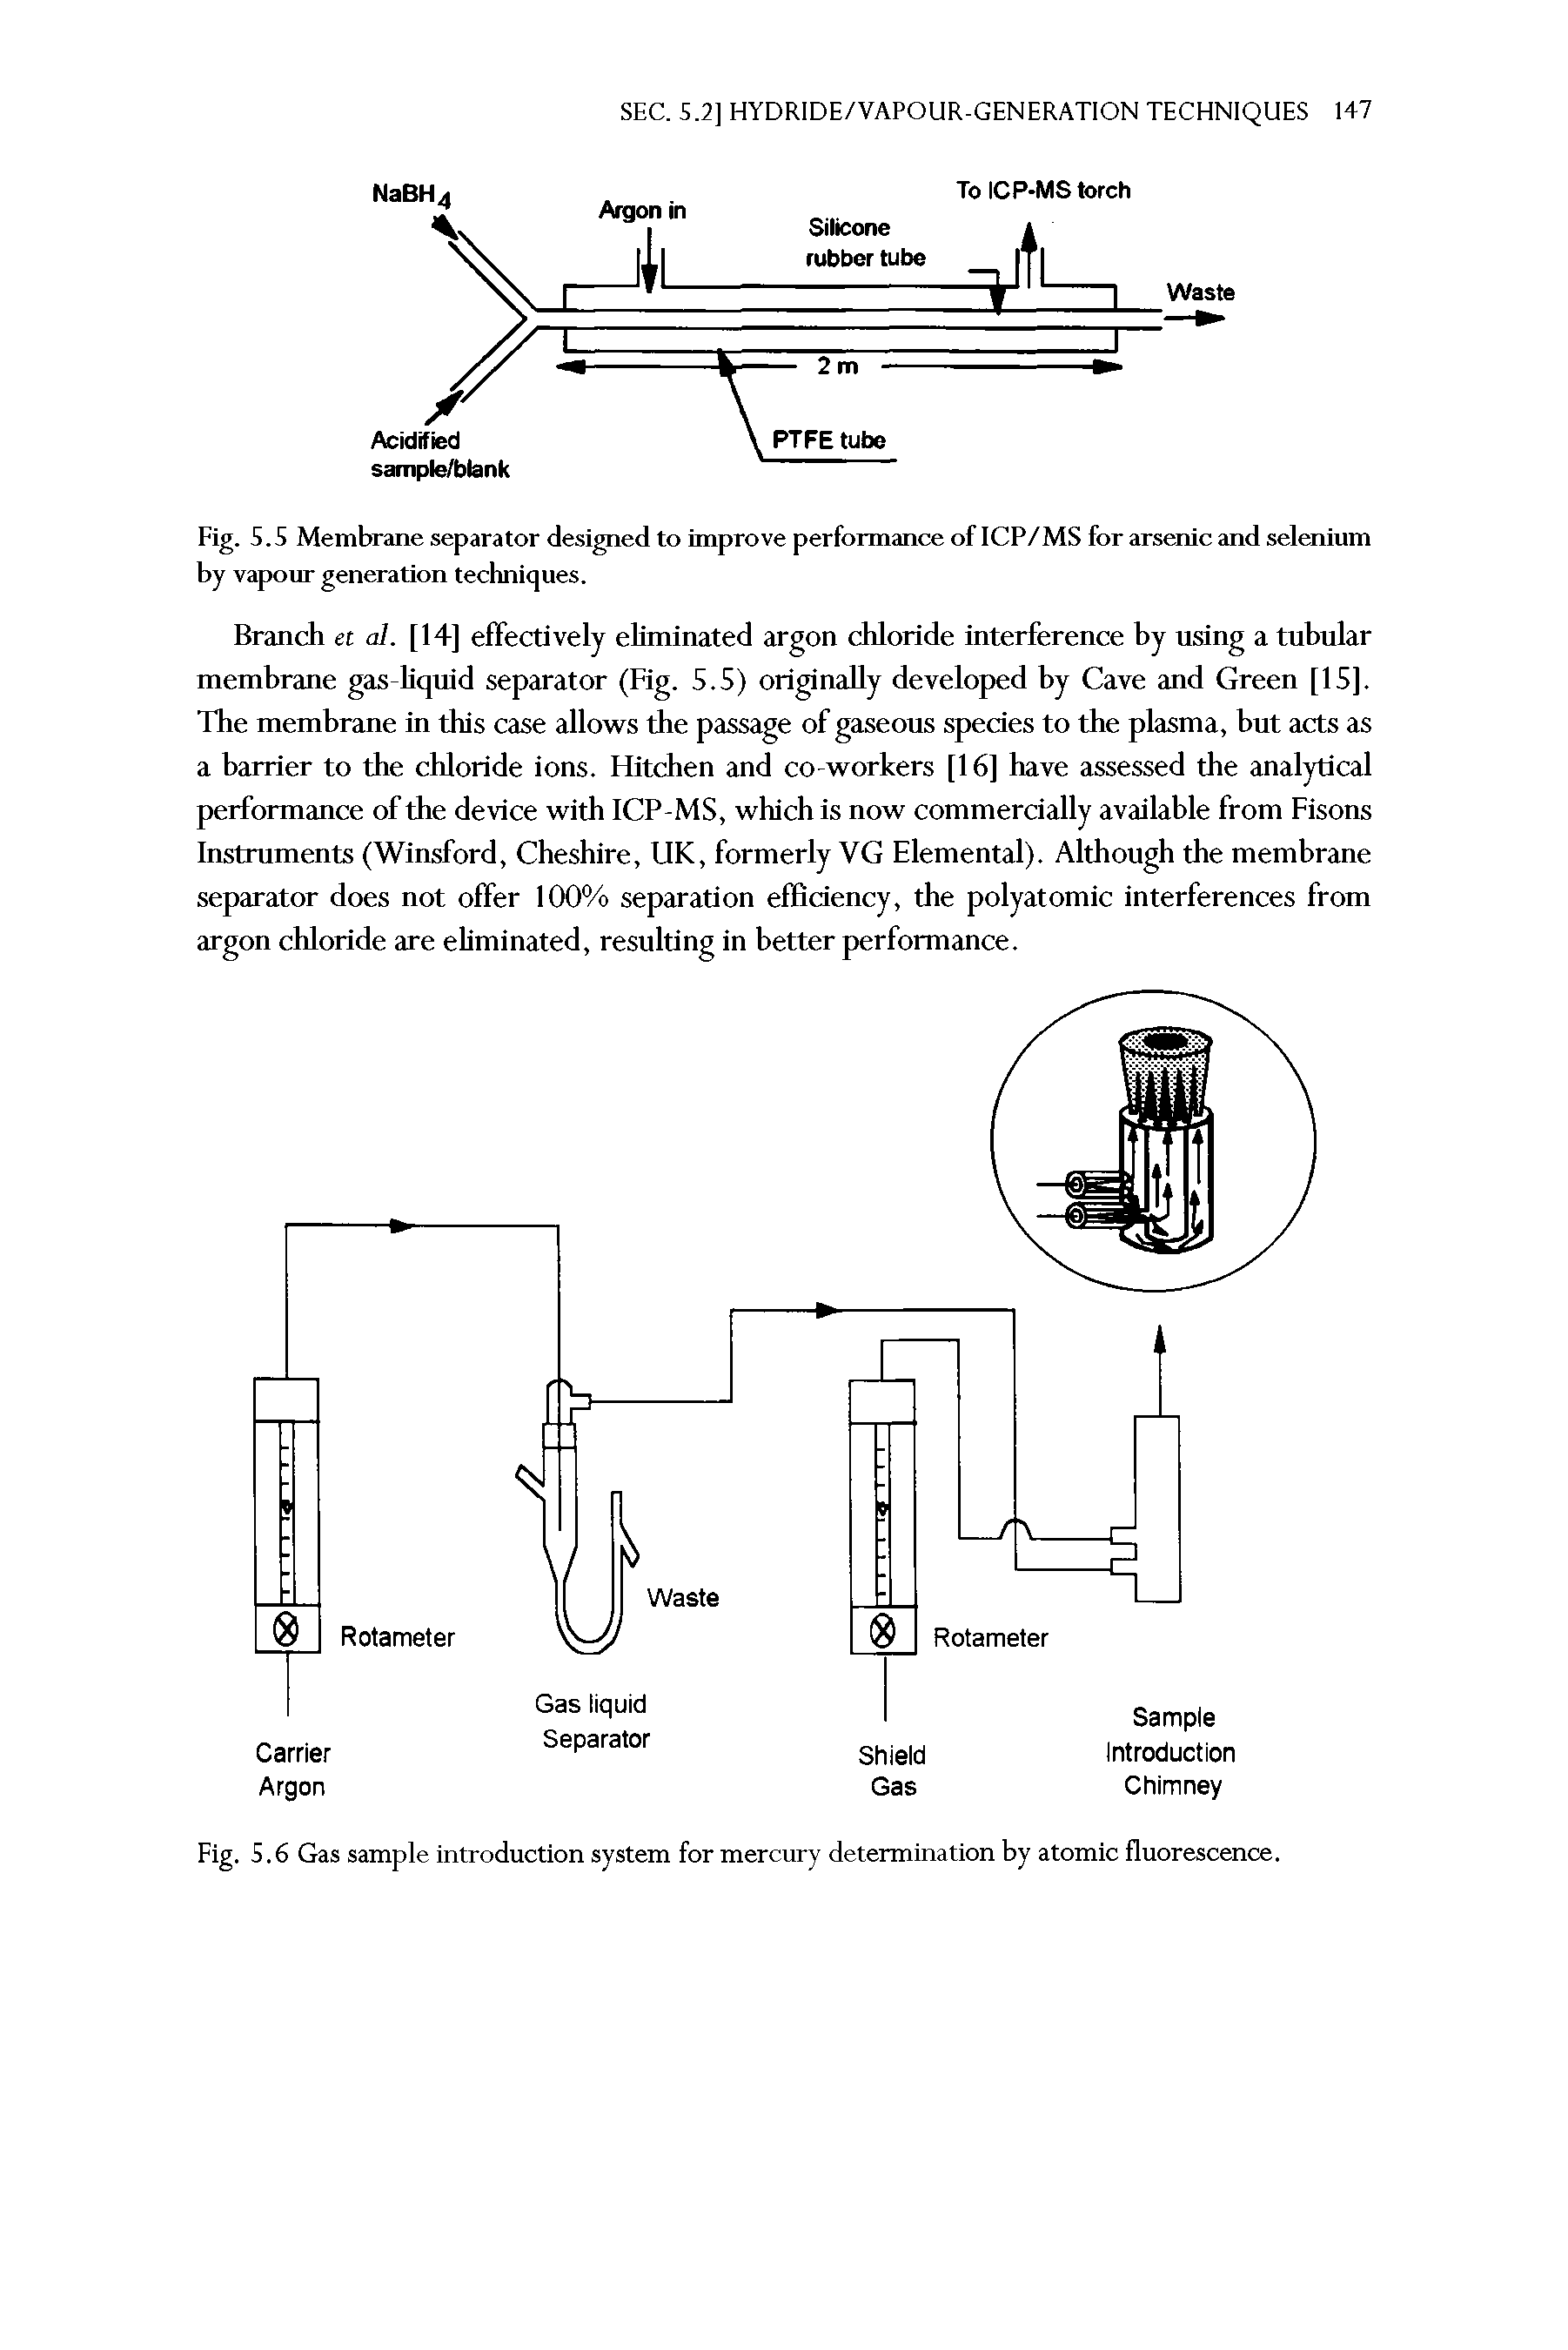 Fig. S.6 Gas sample introduction system for mercury determination by atomic fluorescence.